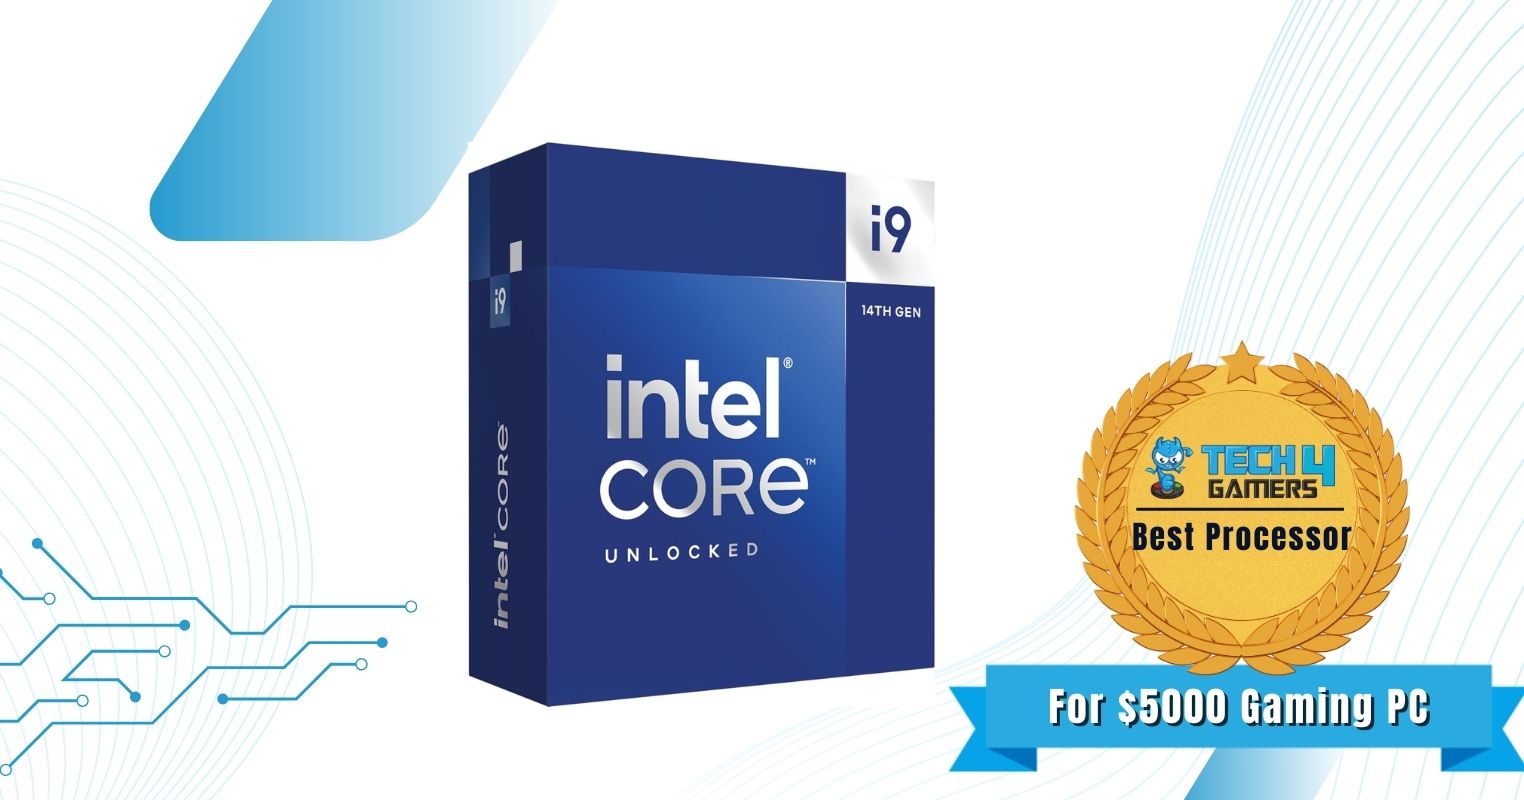 Intel Core i9-14900K - Best Processor For Gaming PC Under $5000